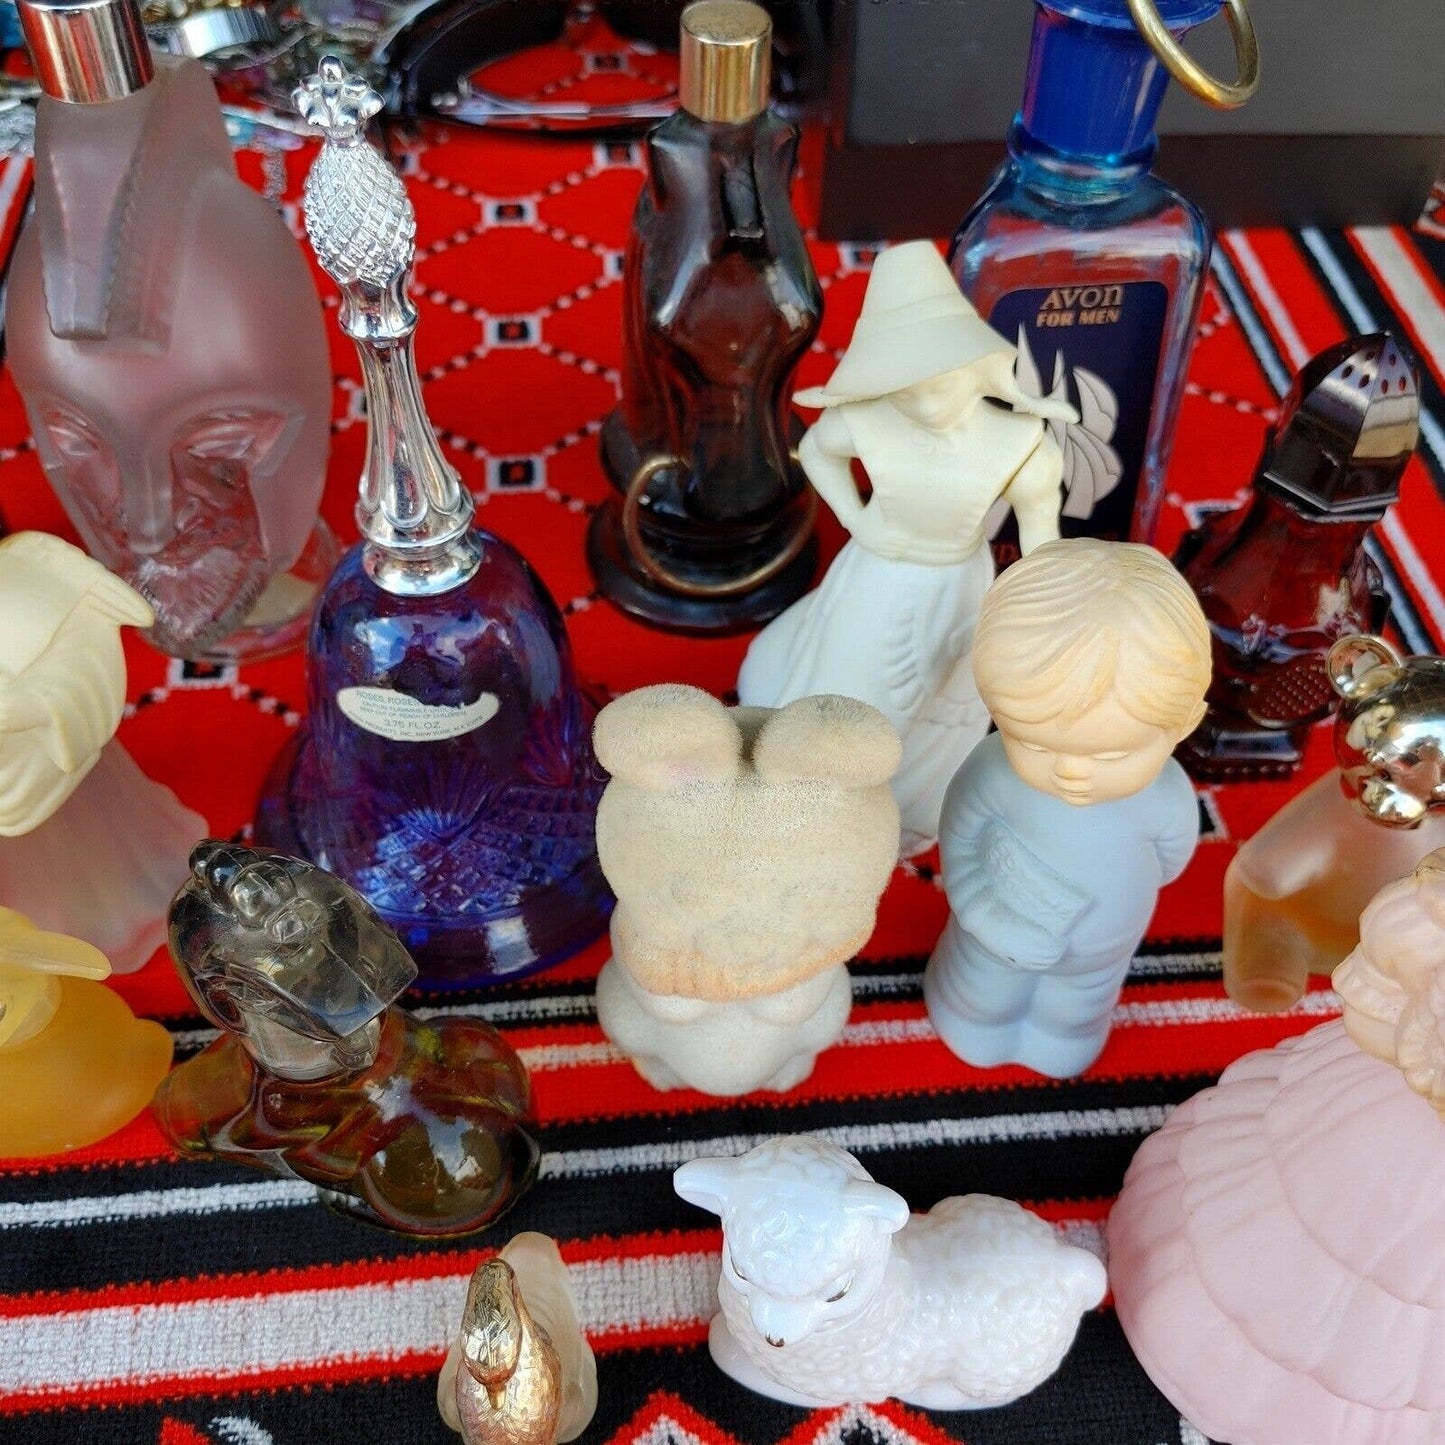 Assorted Avon! 17 Avon Perfume Cologne Figures Bottles Collectible Free Shipping